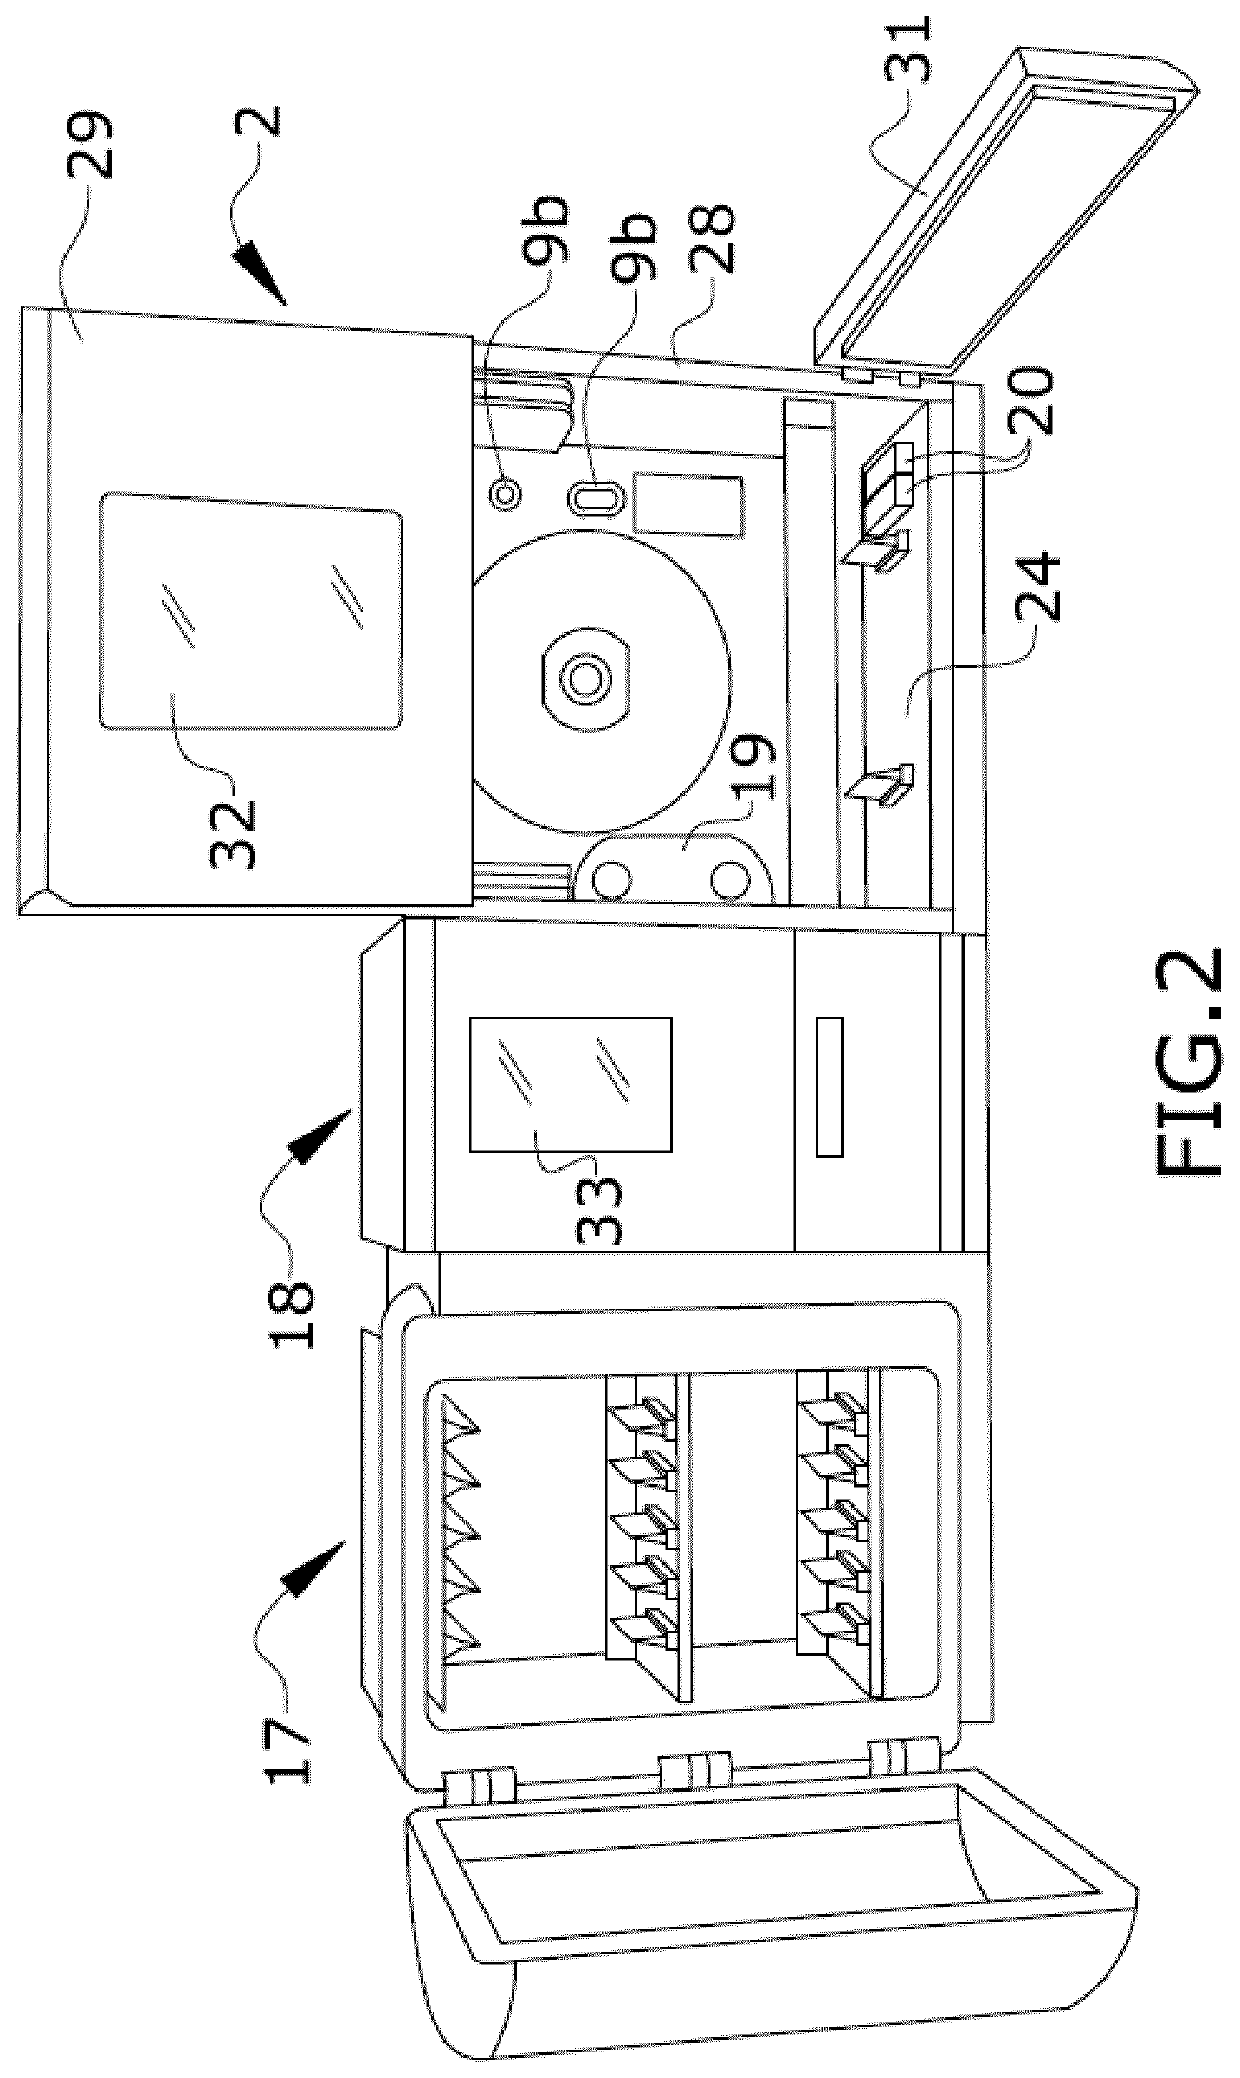 Disposable cartridge cooperating with a platform in a flexible system for handling and/or manipulating fluids